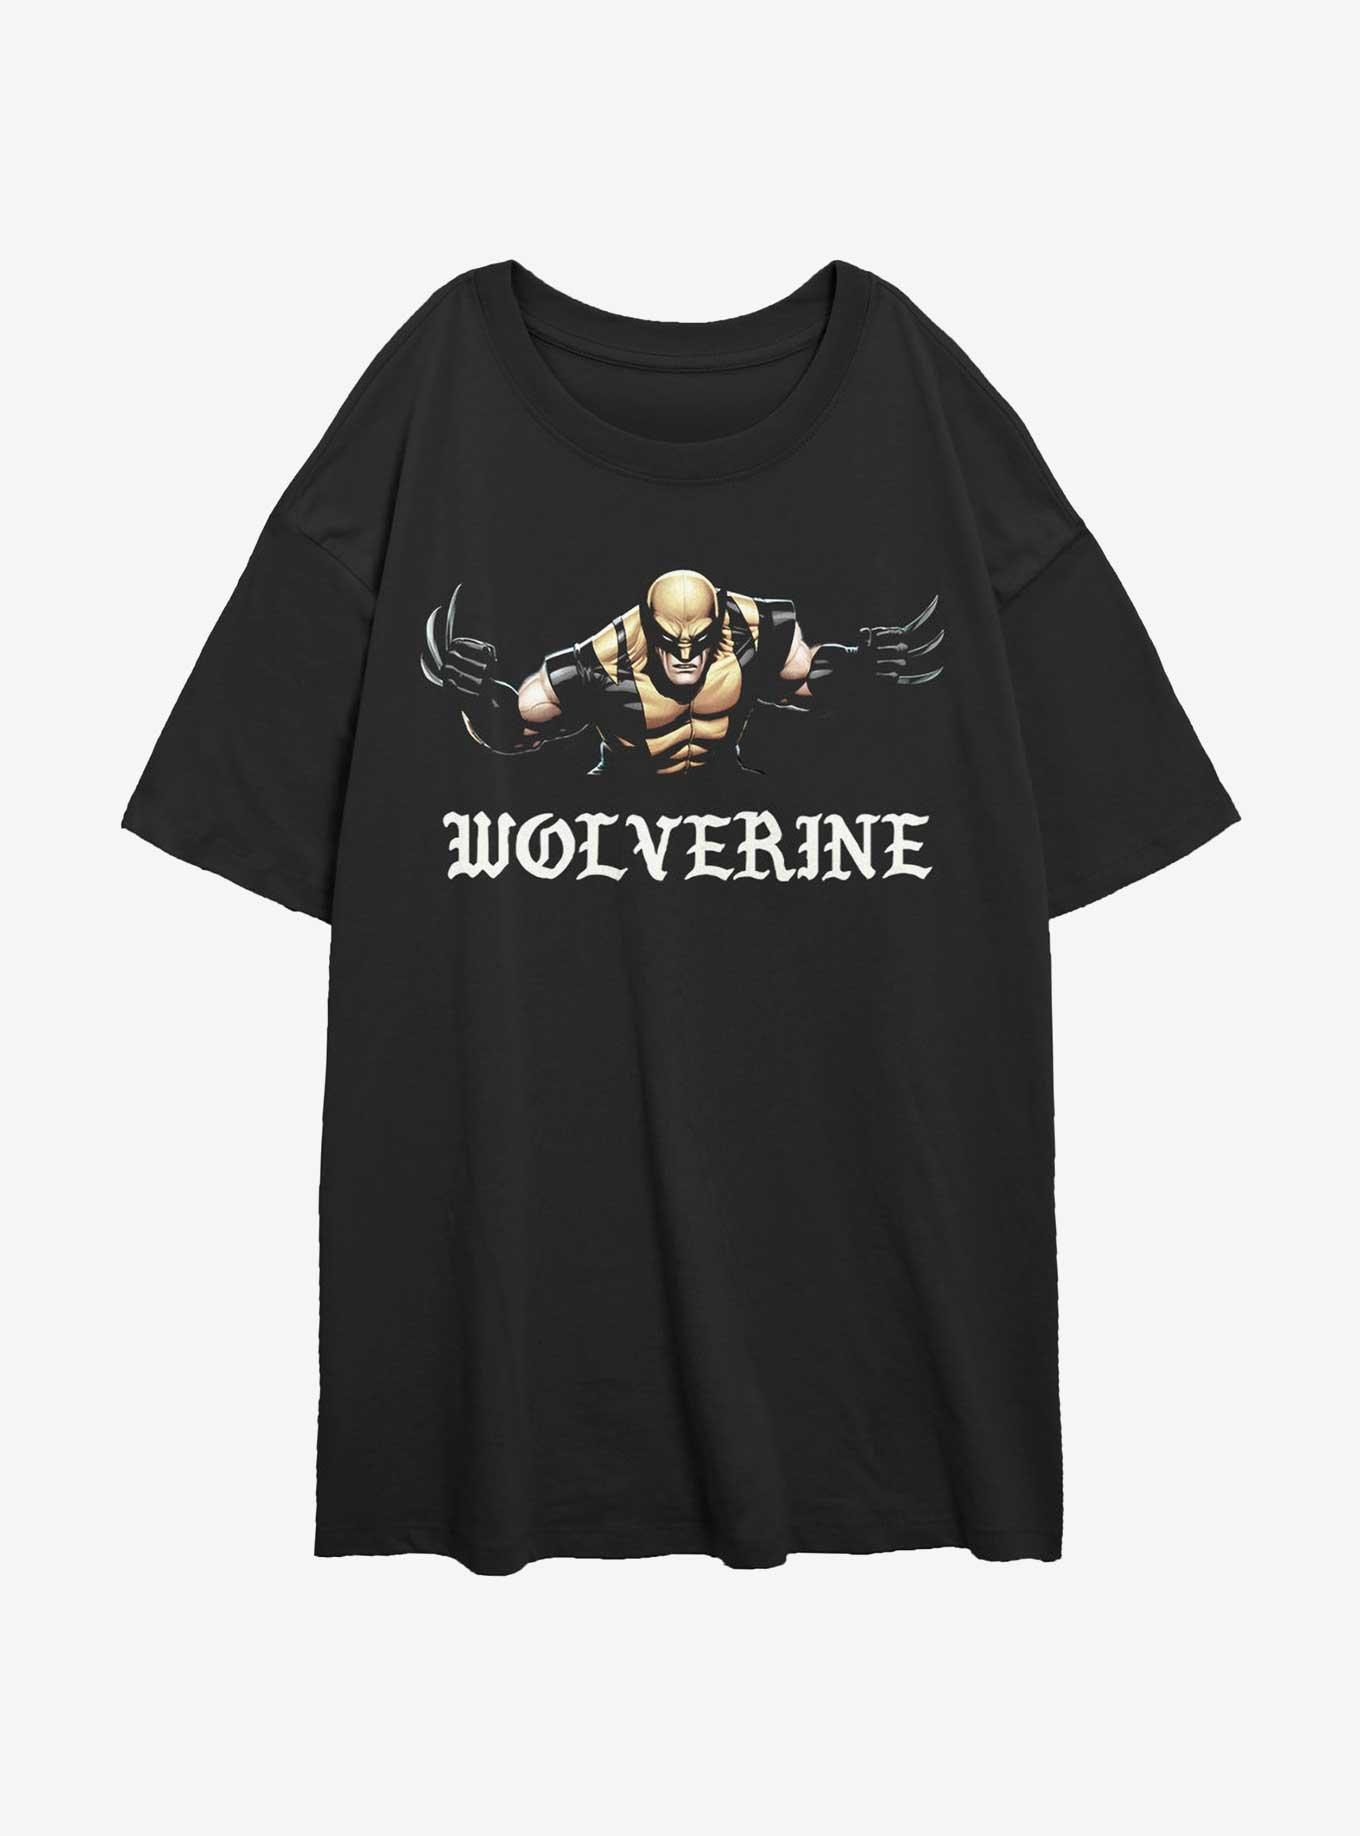 Wolverine Punch With Blades Girls Oversized T-Shirt, BLACK, hi-res